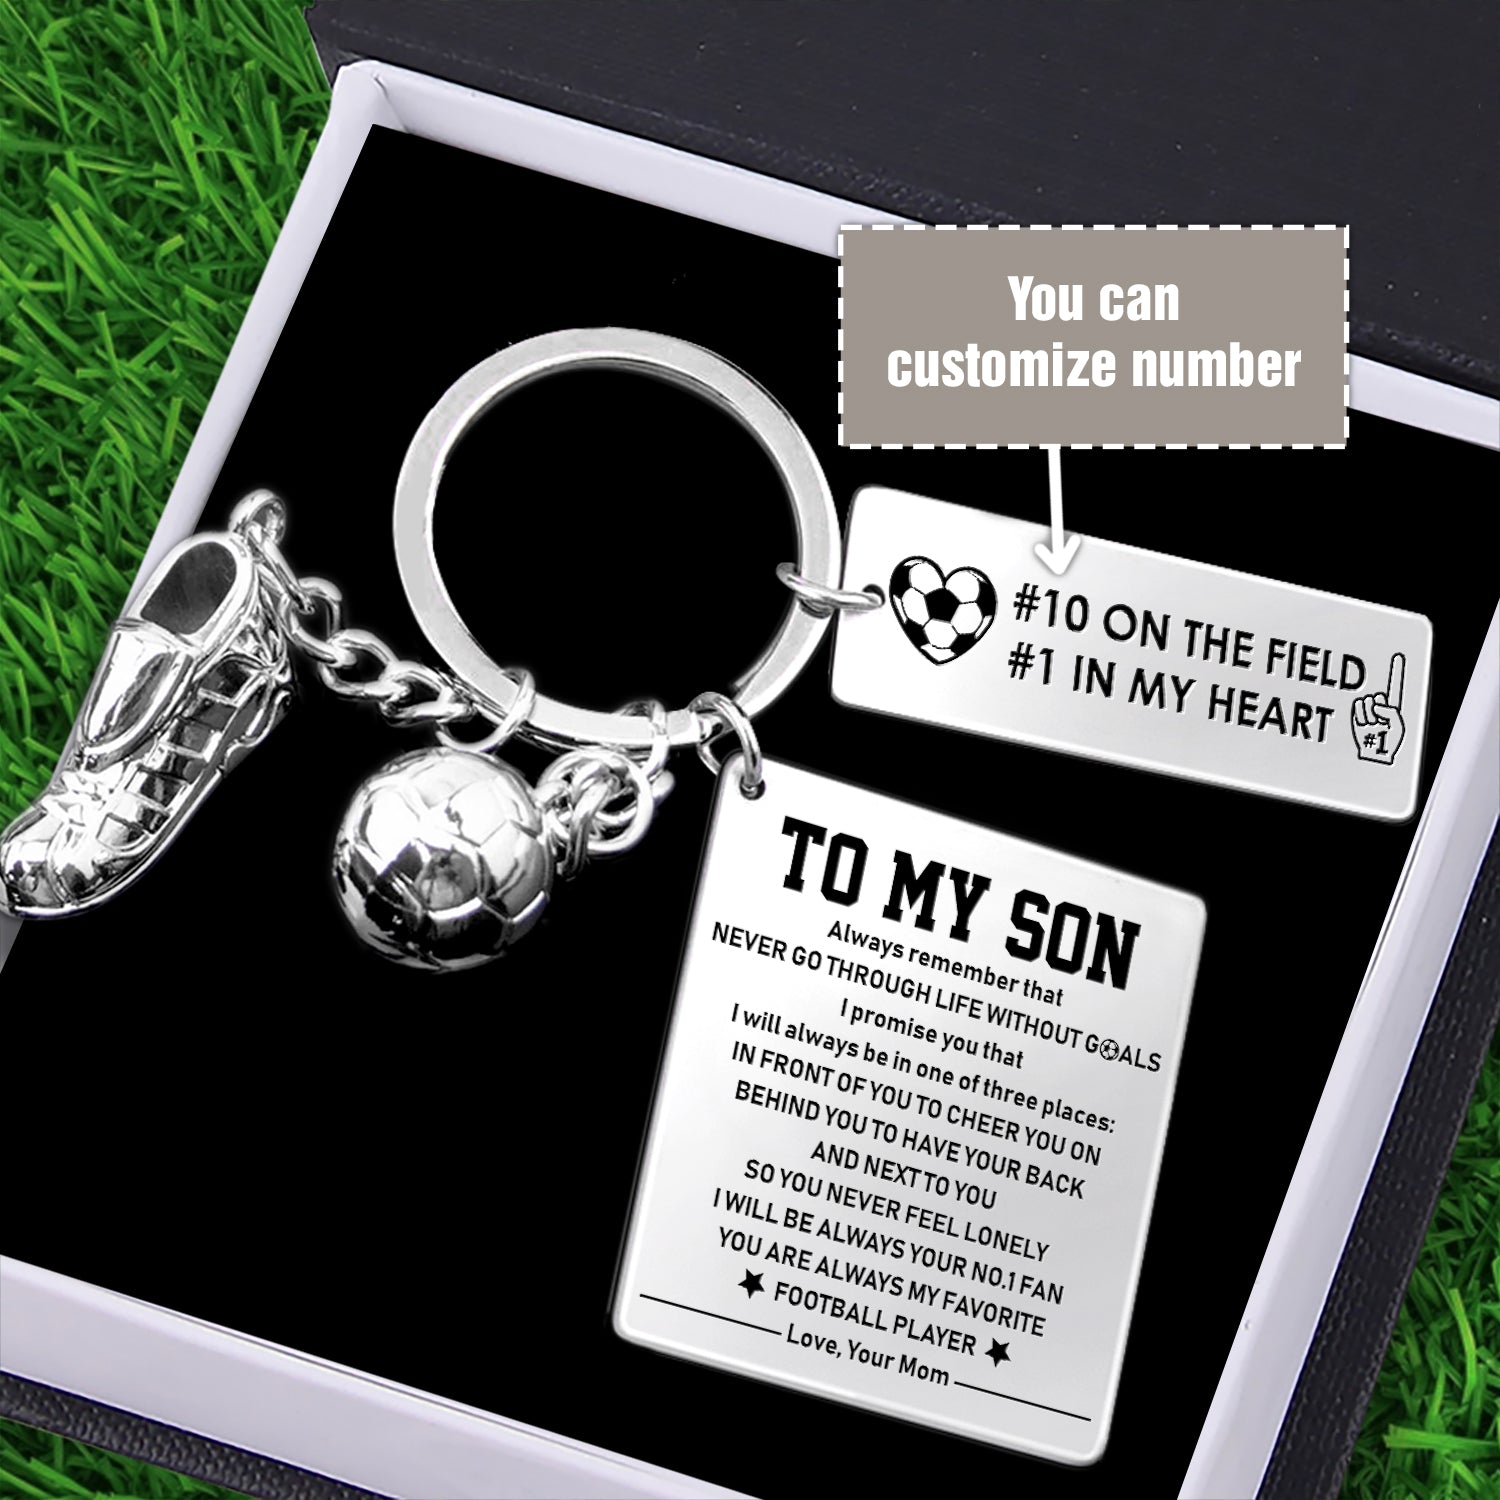 Personalised Football Calendar Keychain - Football - To My Son - From Mom - Your No.1 Fan - Ukgkra16001